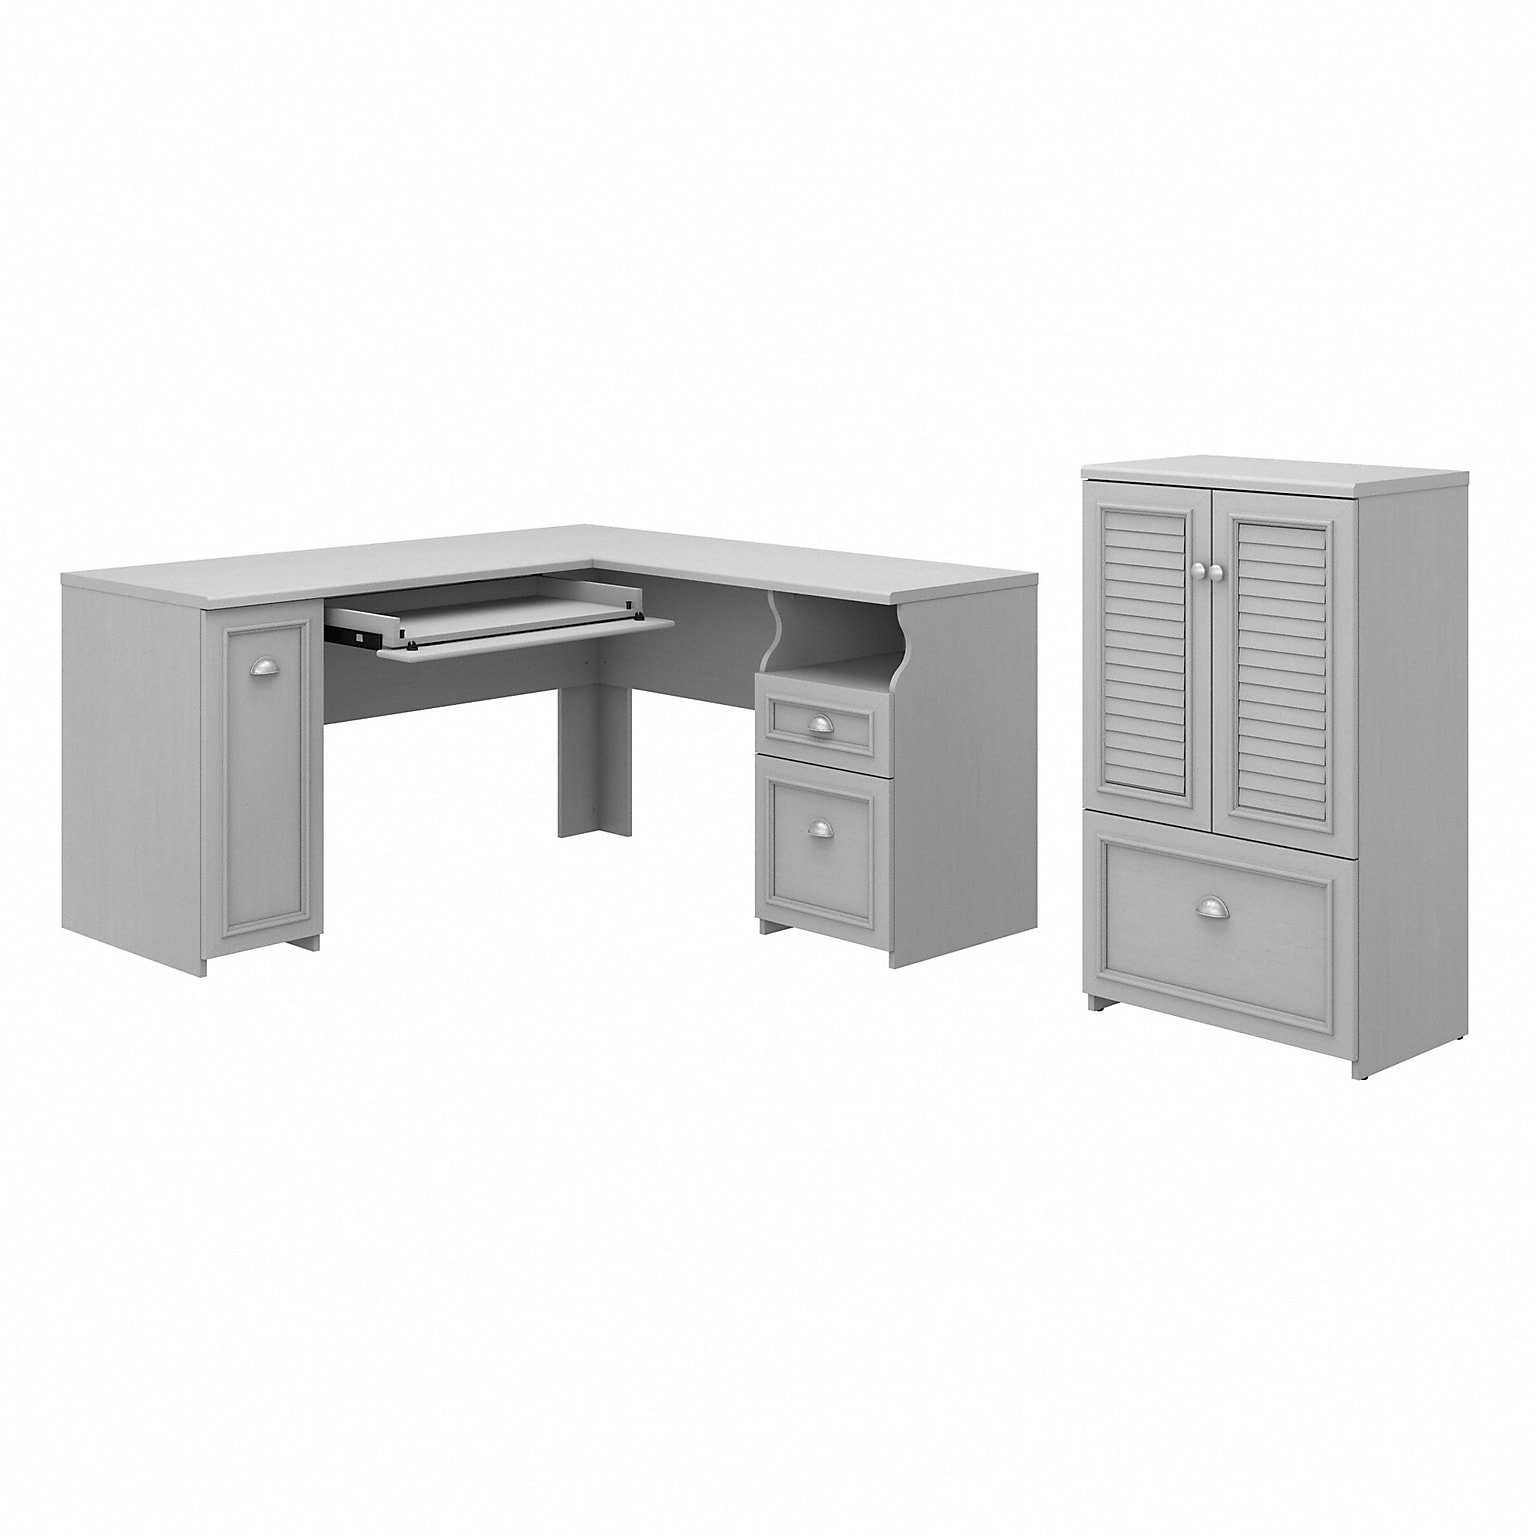 Bush Furniture Fairview 60W L Shaped Desk and 2 Door Storage Cabinet with File Drawer, Cape Cod Gray (FV009CG)